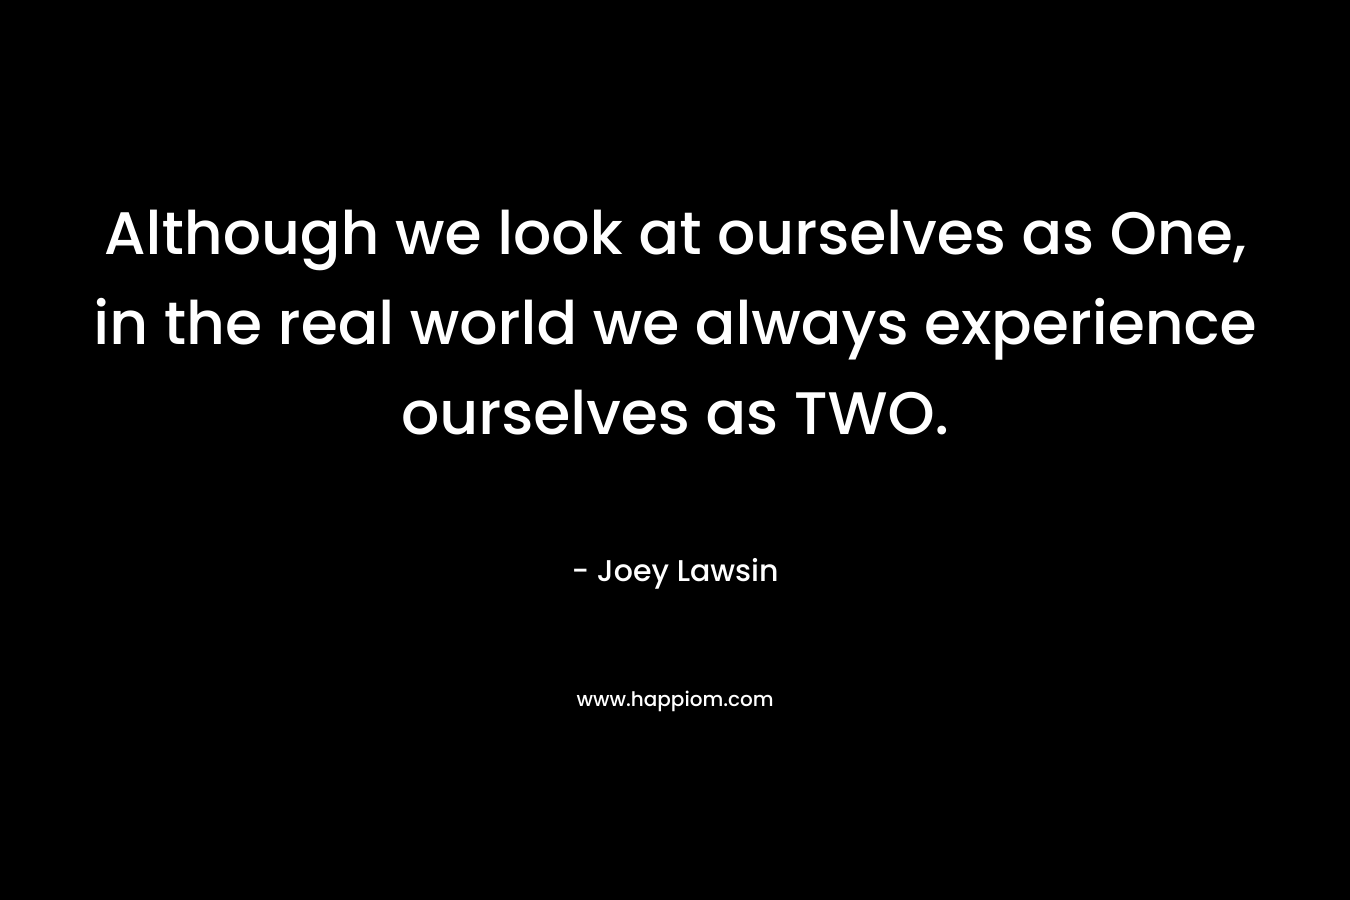 Although we look at ourselves as One, in the real world we always experience ourselves as TWO.